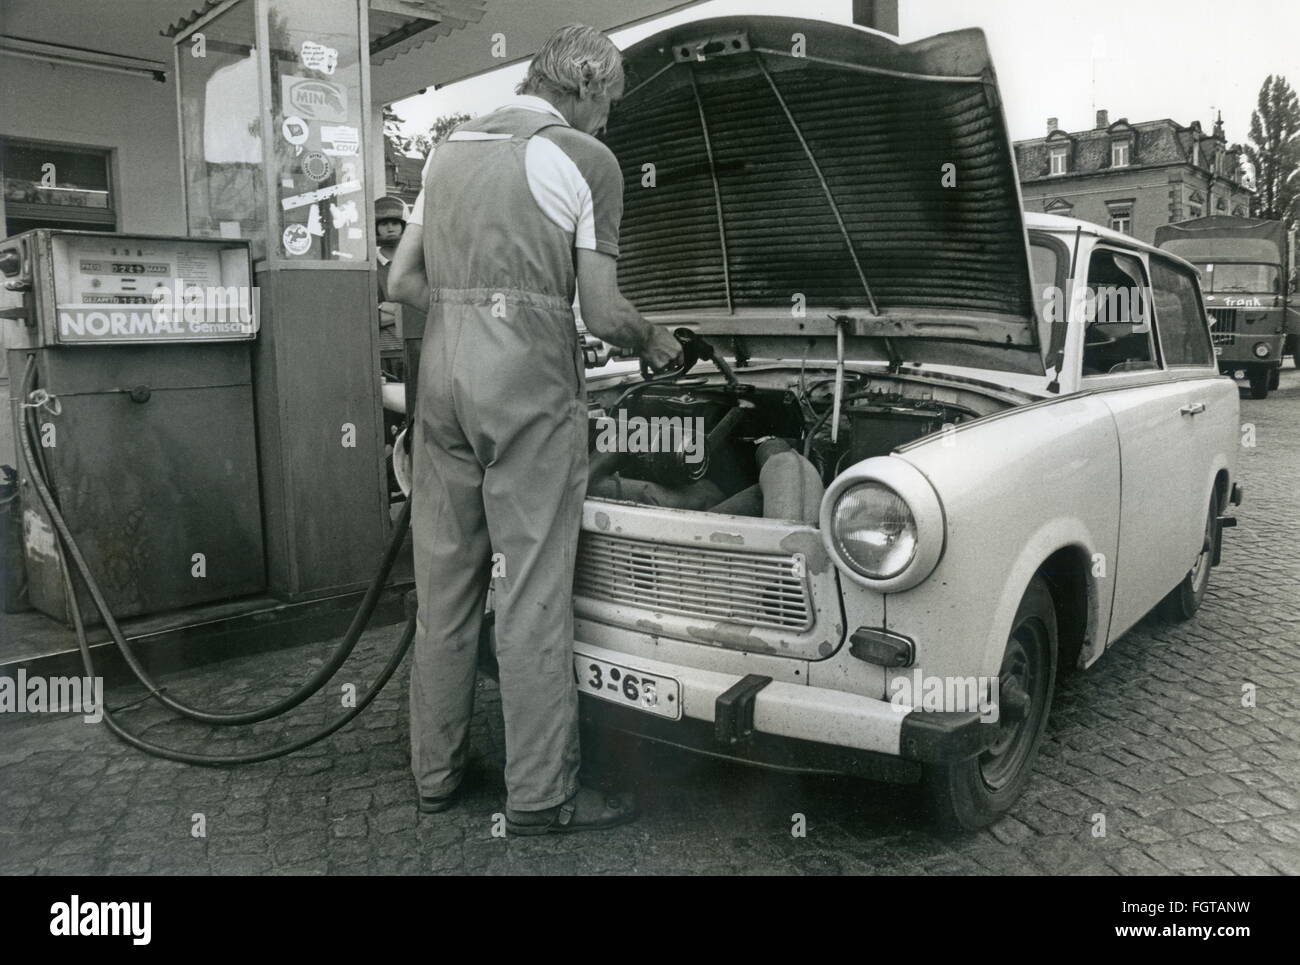 transport / transportation,car,filling station attendant refuelling Trabant,Trabi Kombi 601,Dresden,Germany,East-Germany,July 1990,tank under the hood,gas station,petrol stations,gas stations,filling station,fuelling station,filling stations,fuelling stations,service station,service stations,petrol pump,gas pump,petrol pumps,gas pumps,fuel pump,gasoline pump,fuelling,lean gas mixture,oil gas combination,two-stroke mix,Minol,profession,professions,work,works,engine bonnet opened,Saxony,turning points,turning point,GDR car,GD,Additional-Rights-Clearences-Not Available Stock Photo